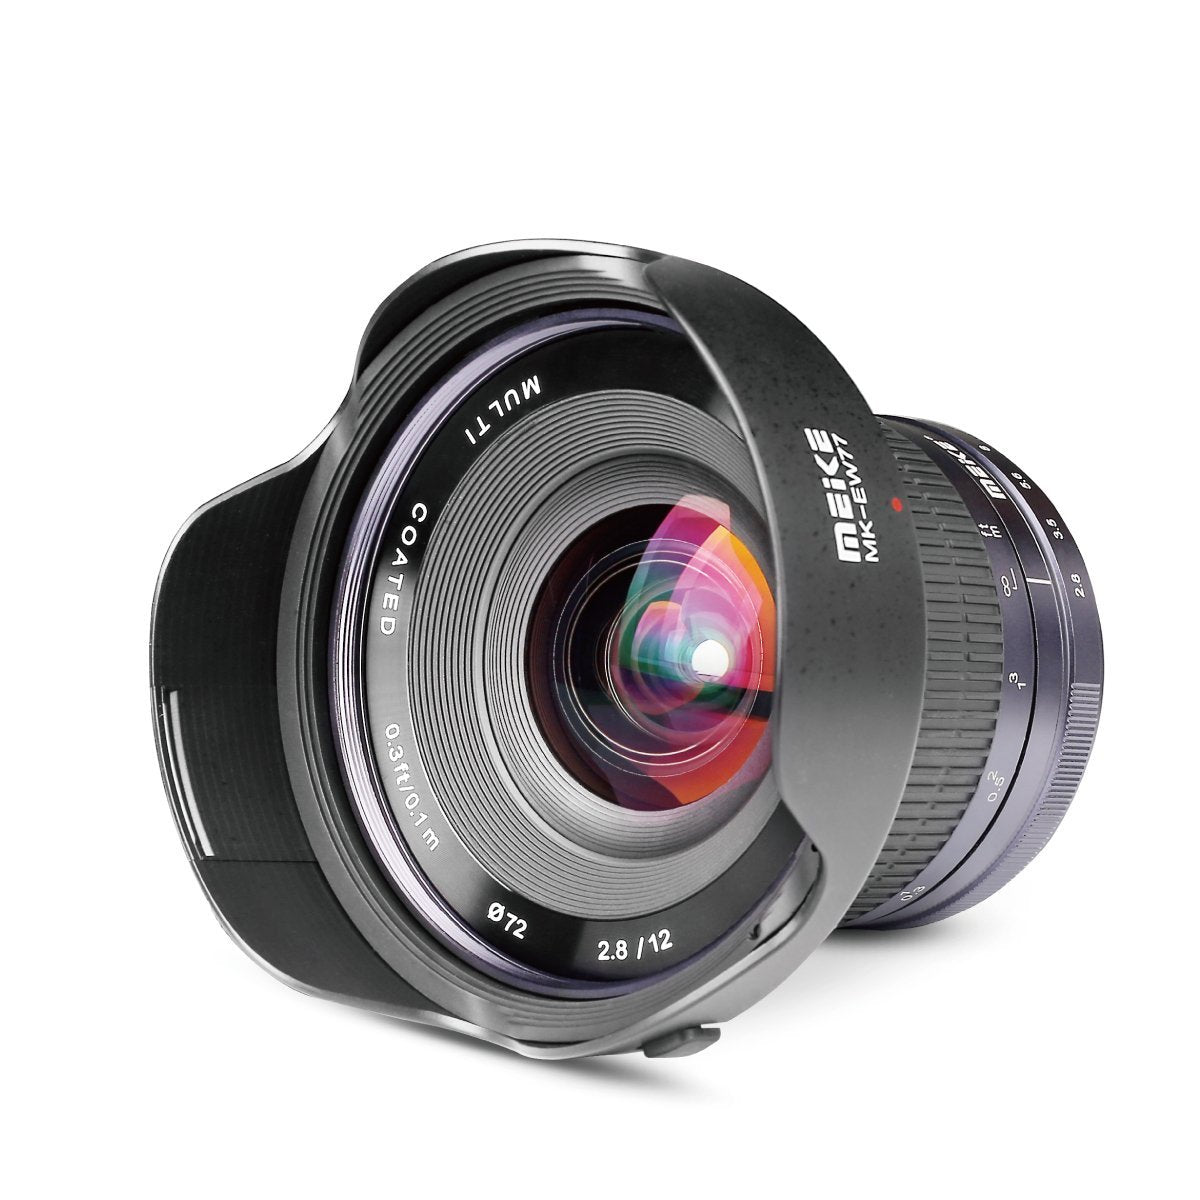 Meike MK-12mm 12mm F/2.8 Ultra Wide Angle Manual Foucs Prime Lens for Sony E Mount APS-C Mirrorless Cameras  